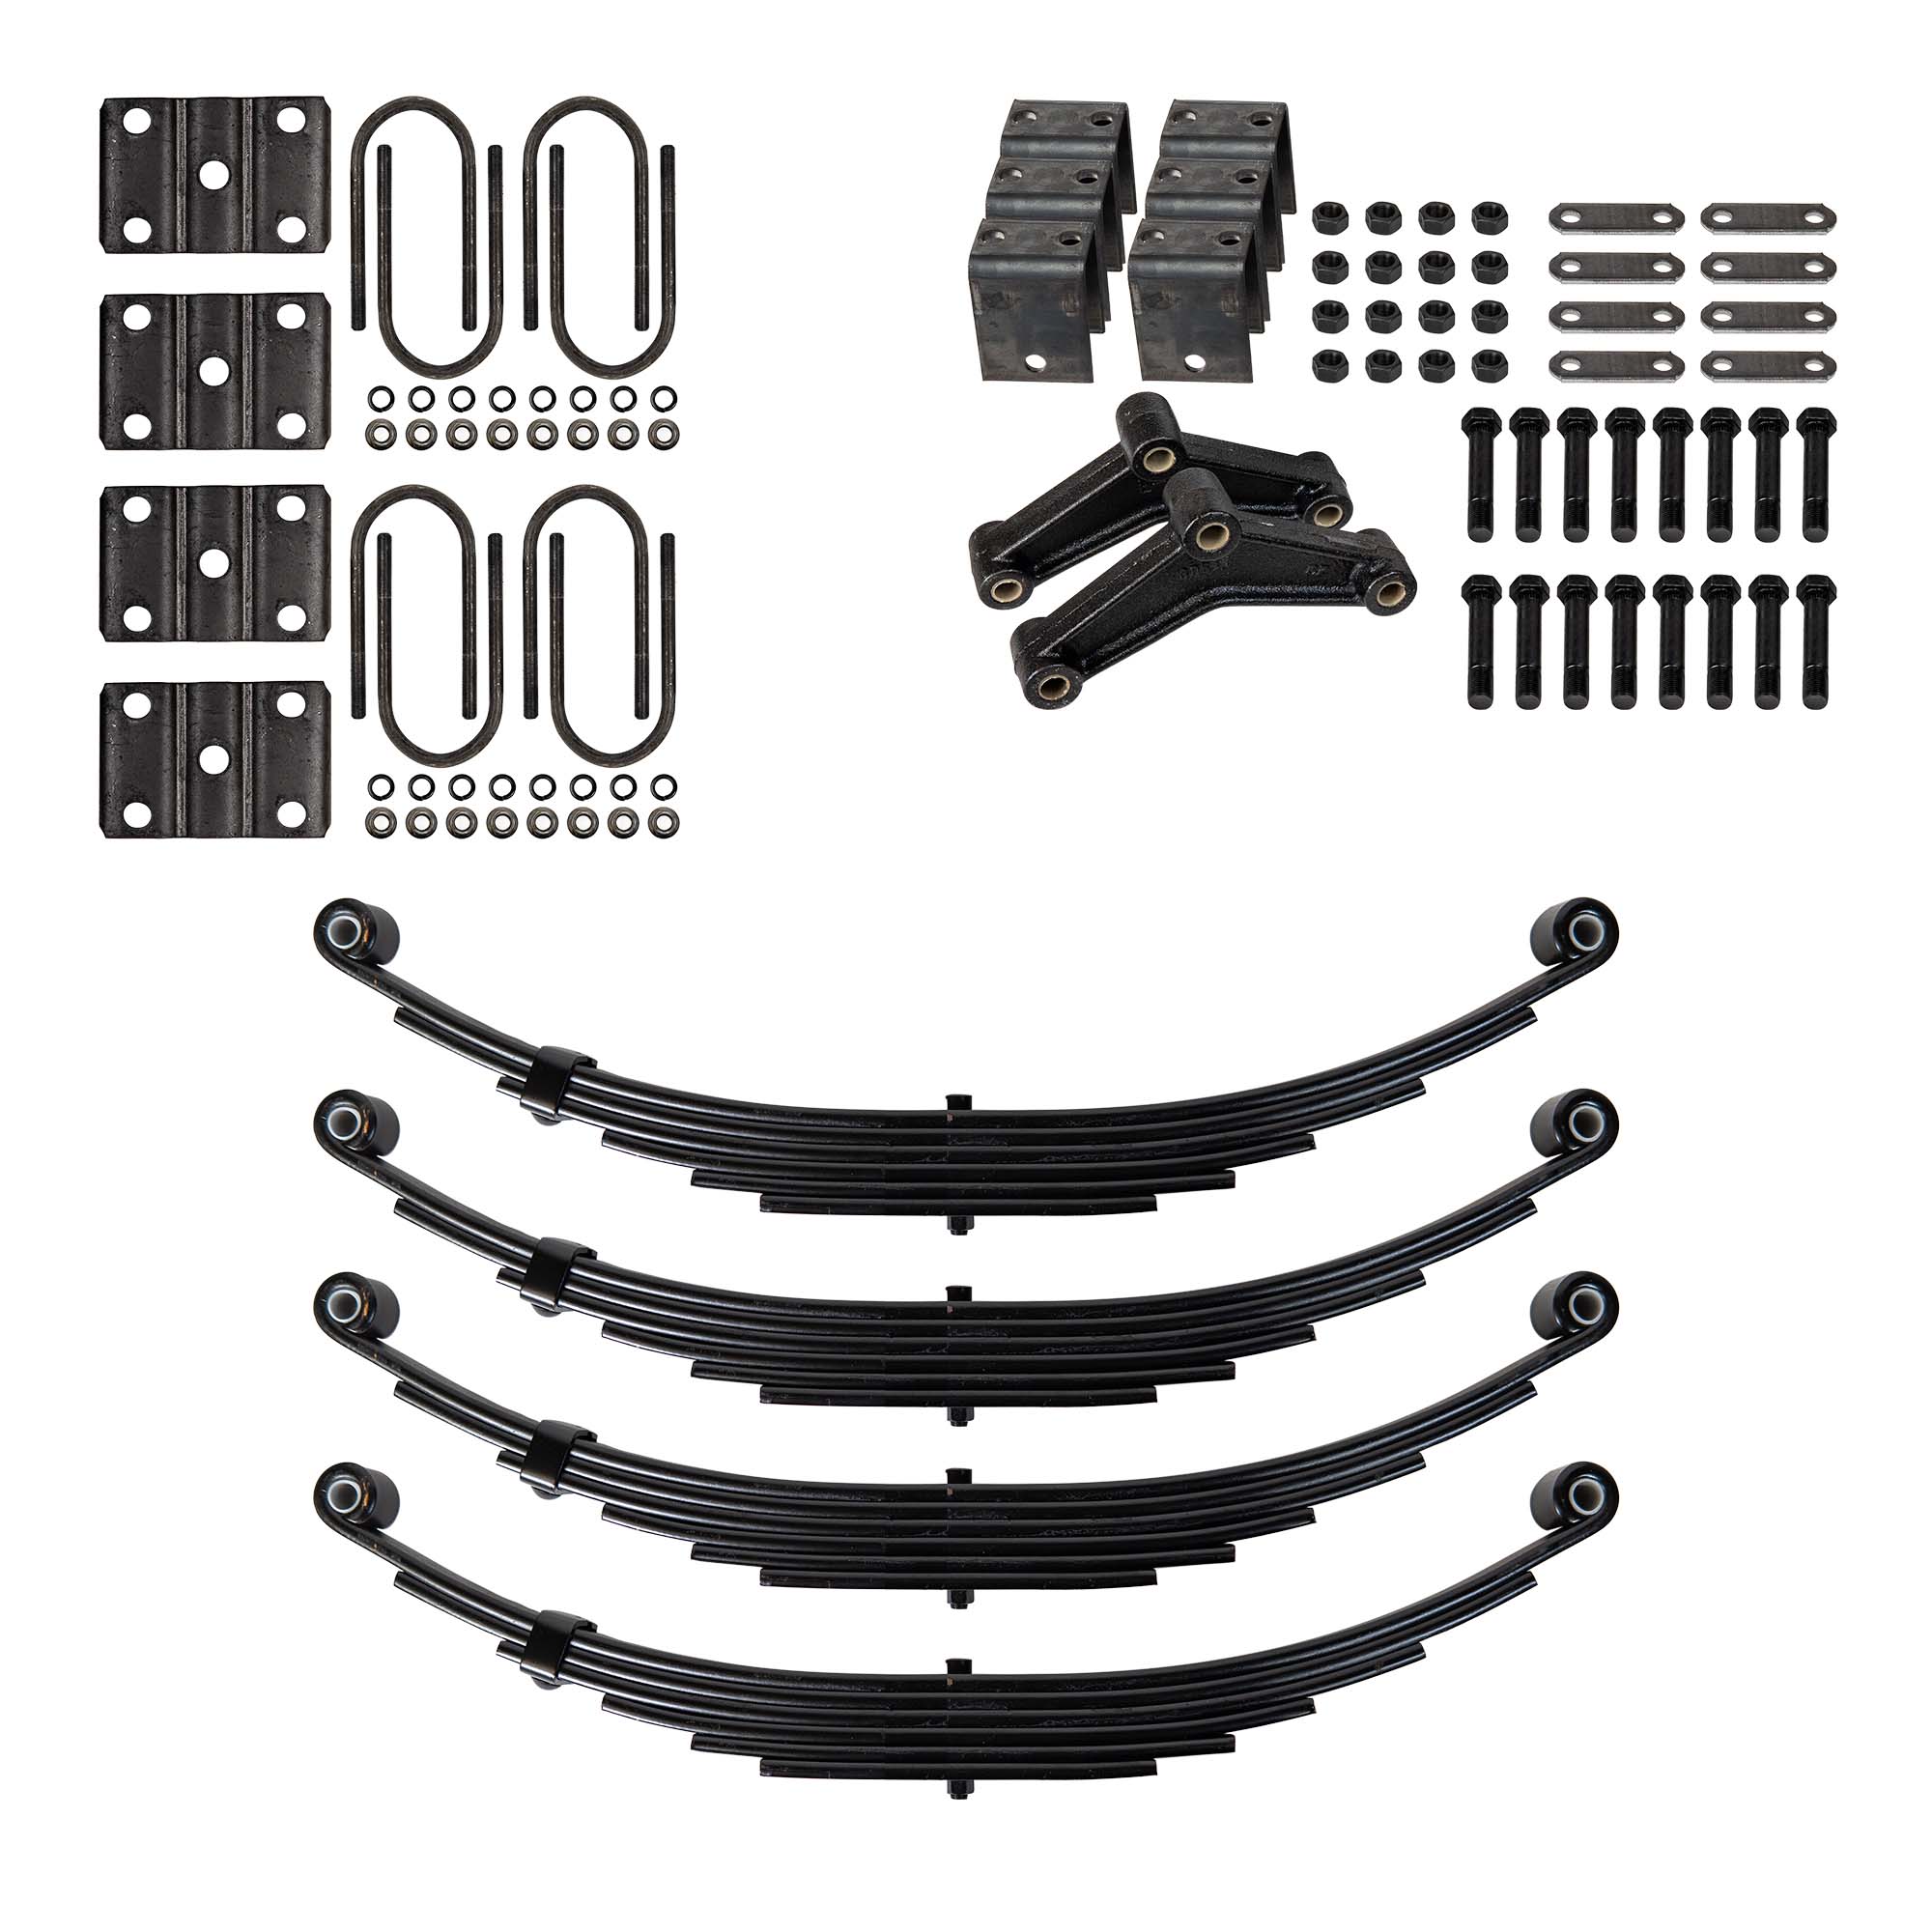 Double Eye Spring for 7000 lb Axles | Trailer Parts Outlet